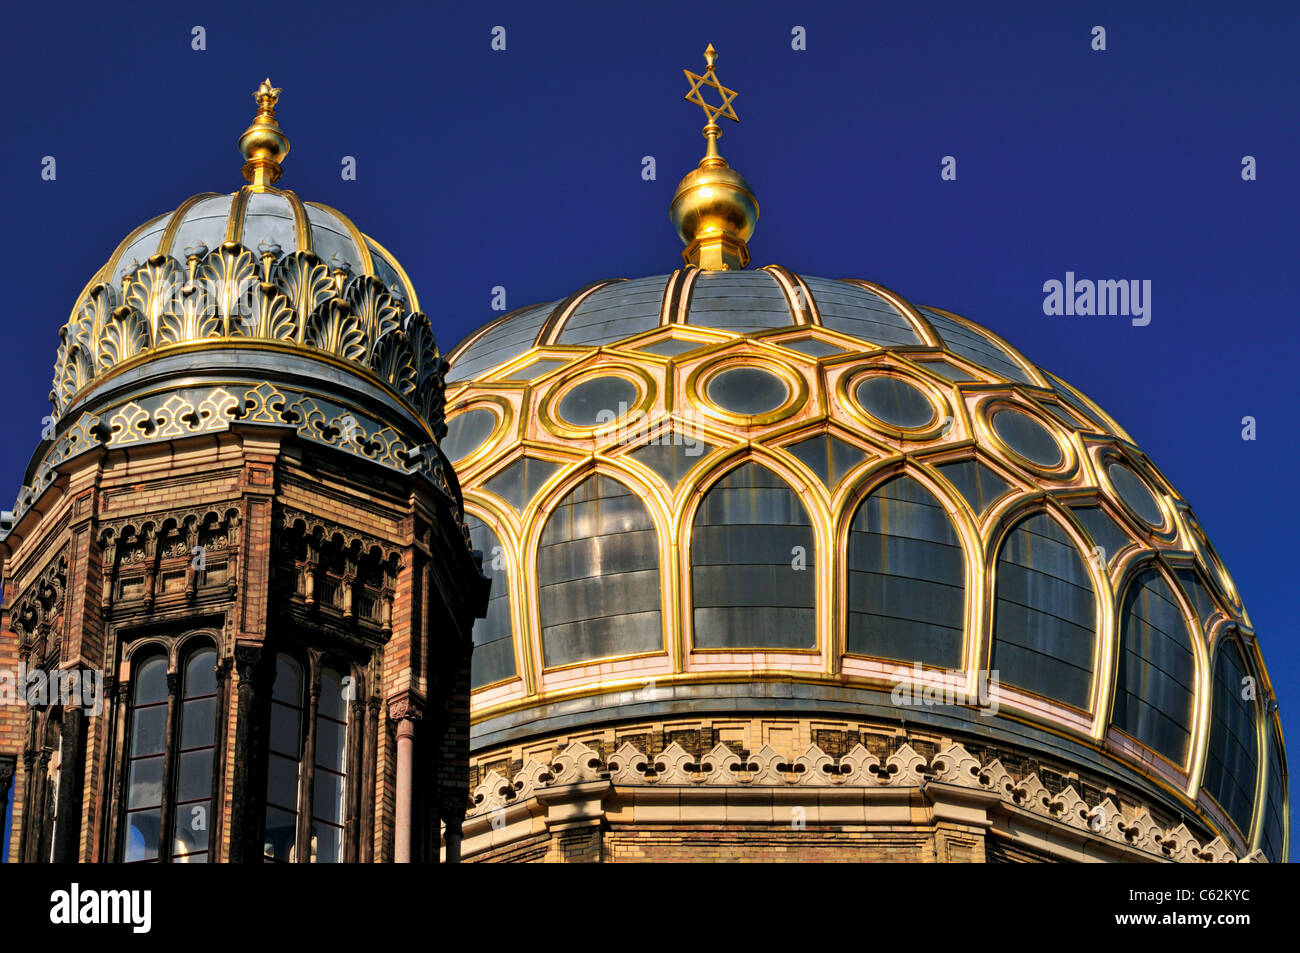 Germany, Berlin: Gold and glass roof of the New Synagogue in the Oranienburger Street Stock Photo